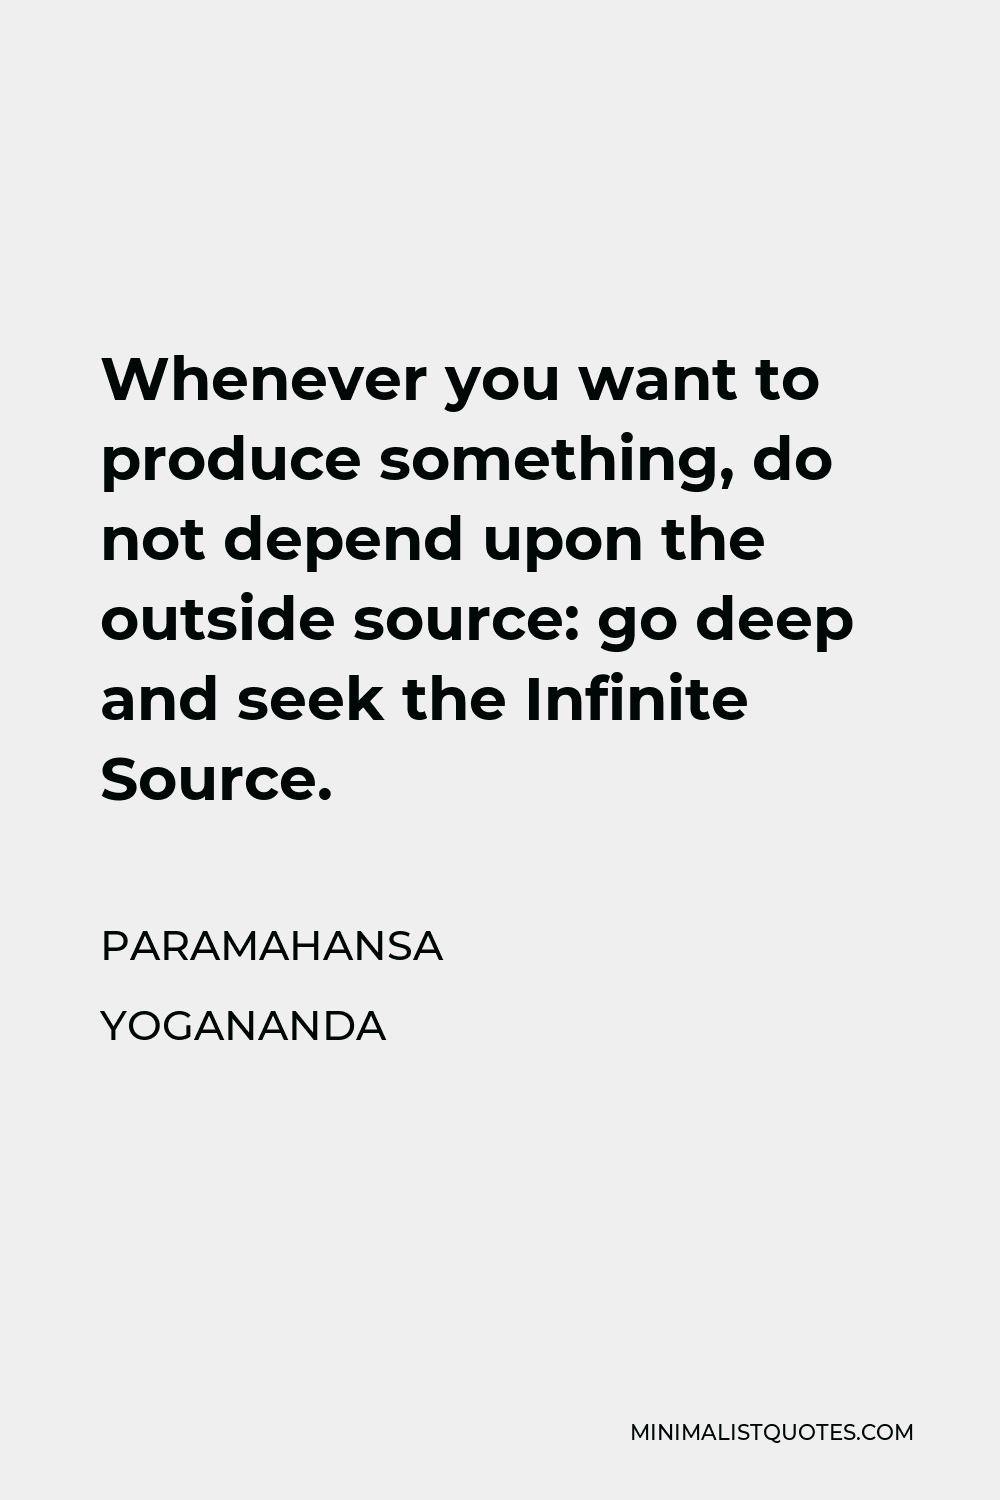 Paramahansa Yogananda Quote - Whenever you want to produce something, do not depend upon the outside source: go deep and seek the Infinite Source.